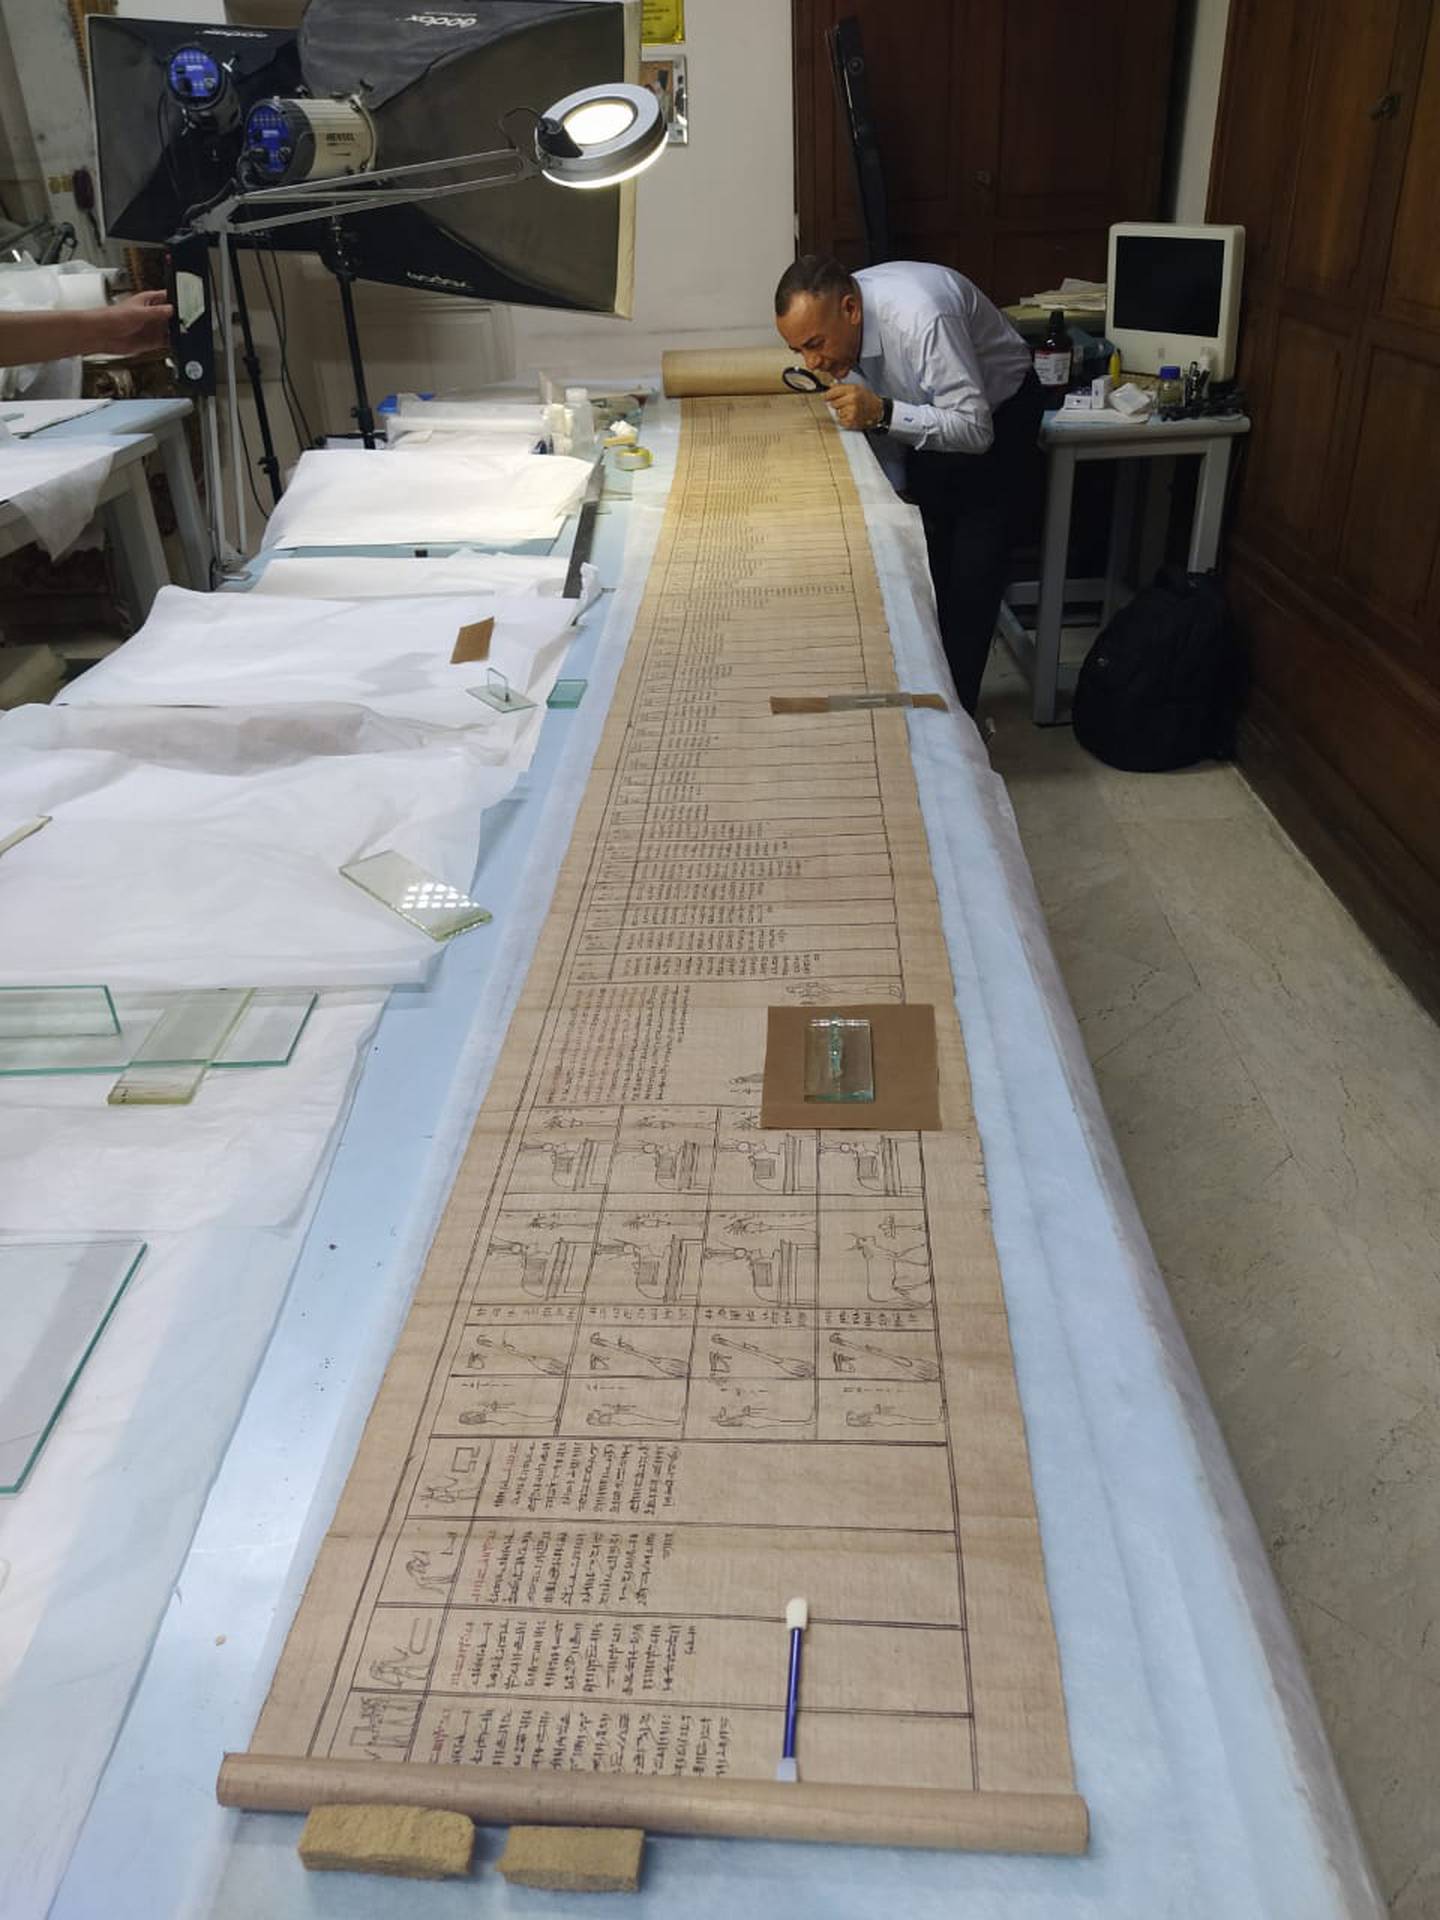 The 16-metre papyrus roll was unveiled at a ceremony at Cairo's Egyptian Museum on Monday